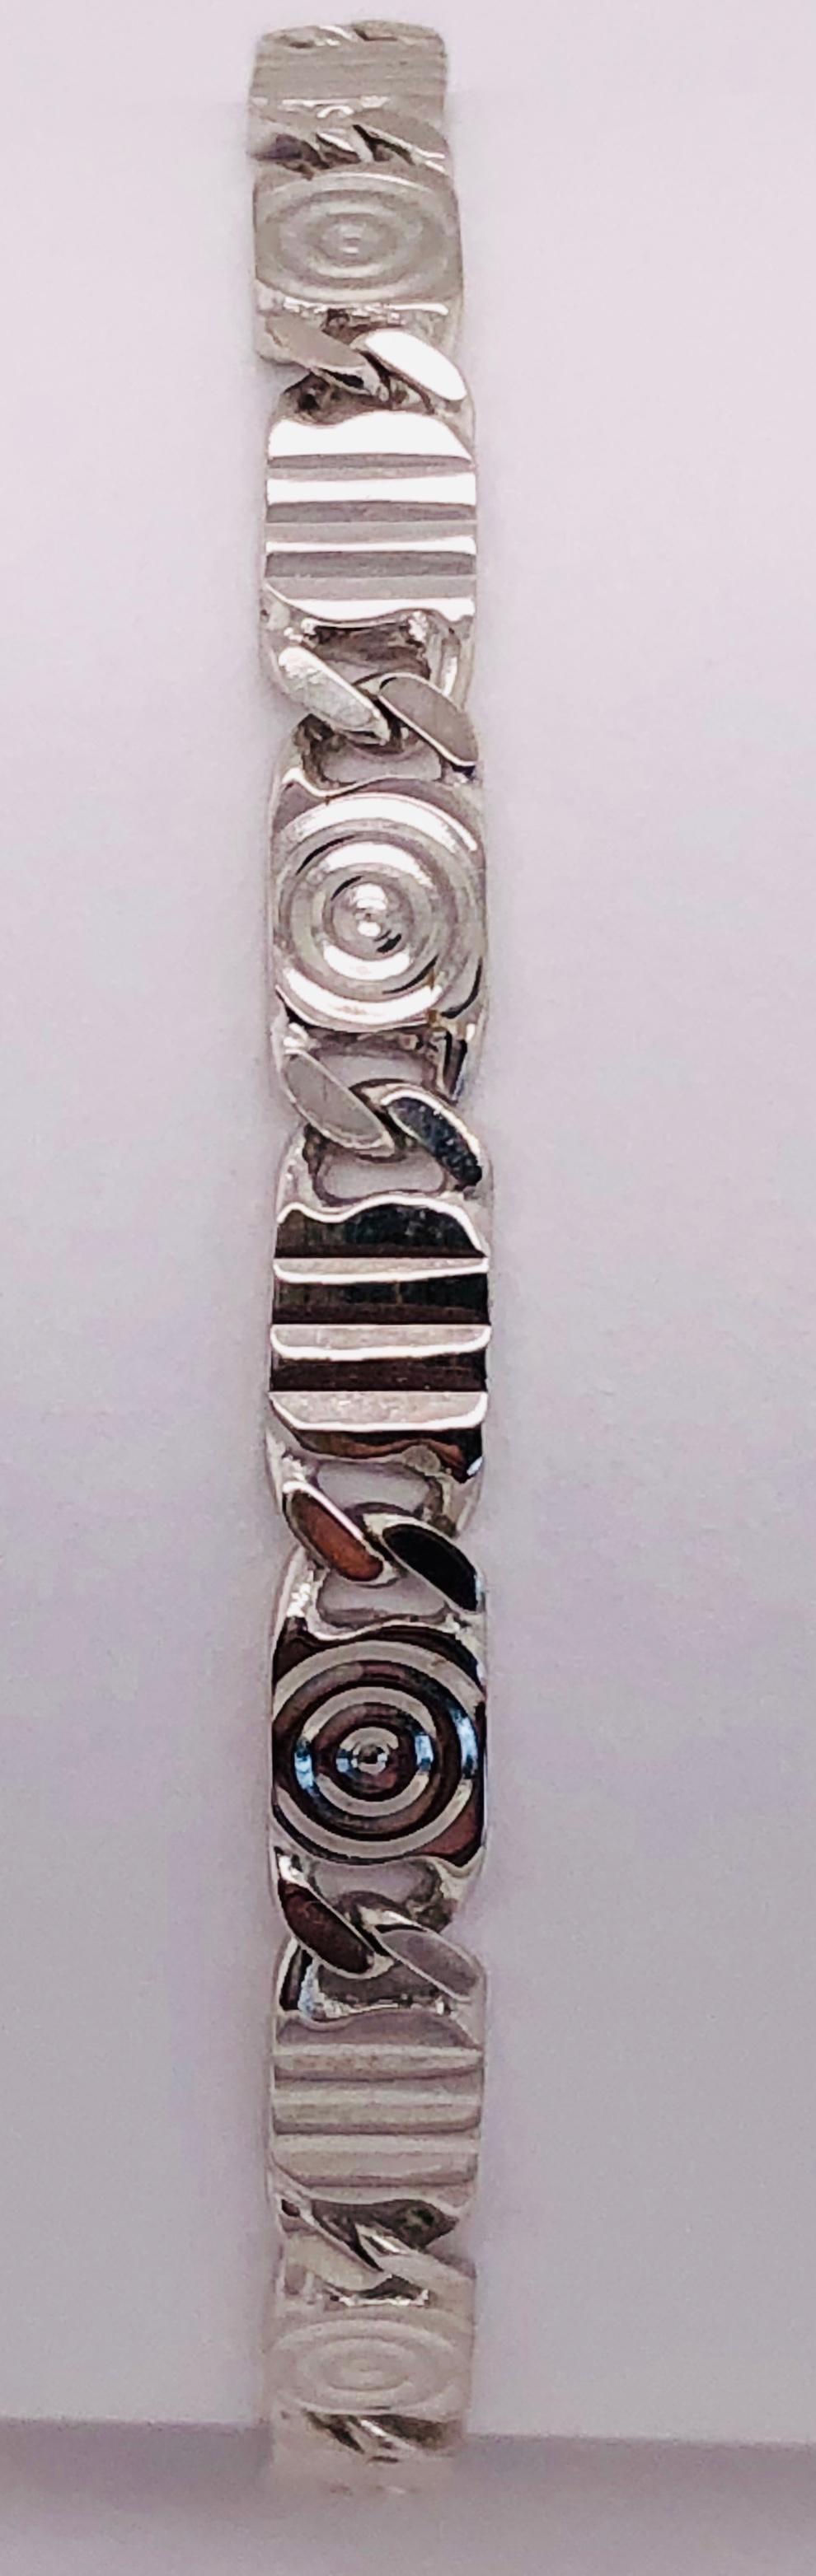 14 Karat White Gold Fancy Link Bracelet In Good Condition For Sale In Stamford, CT